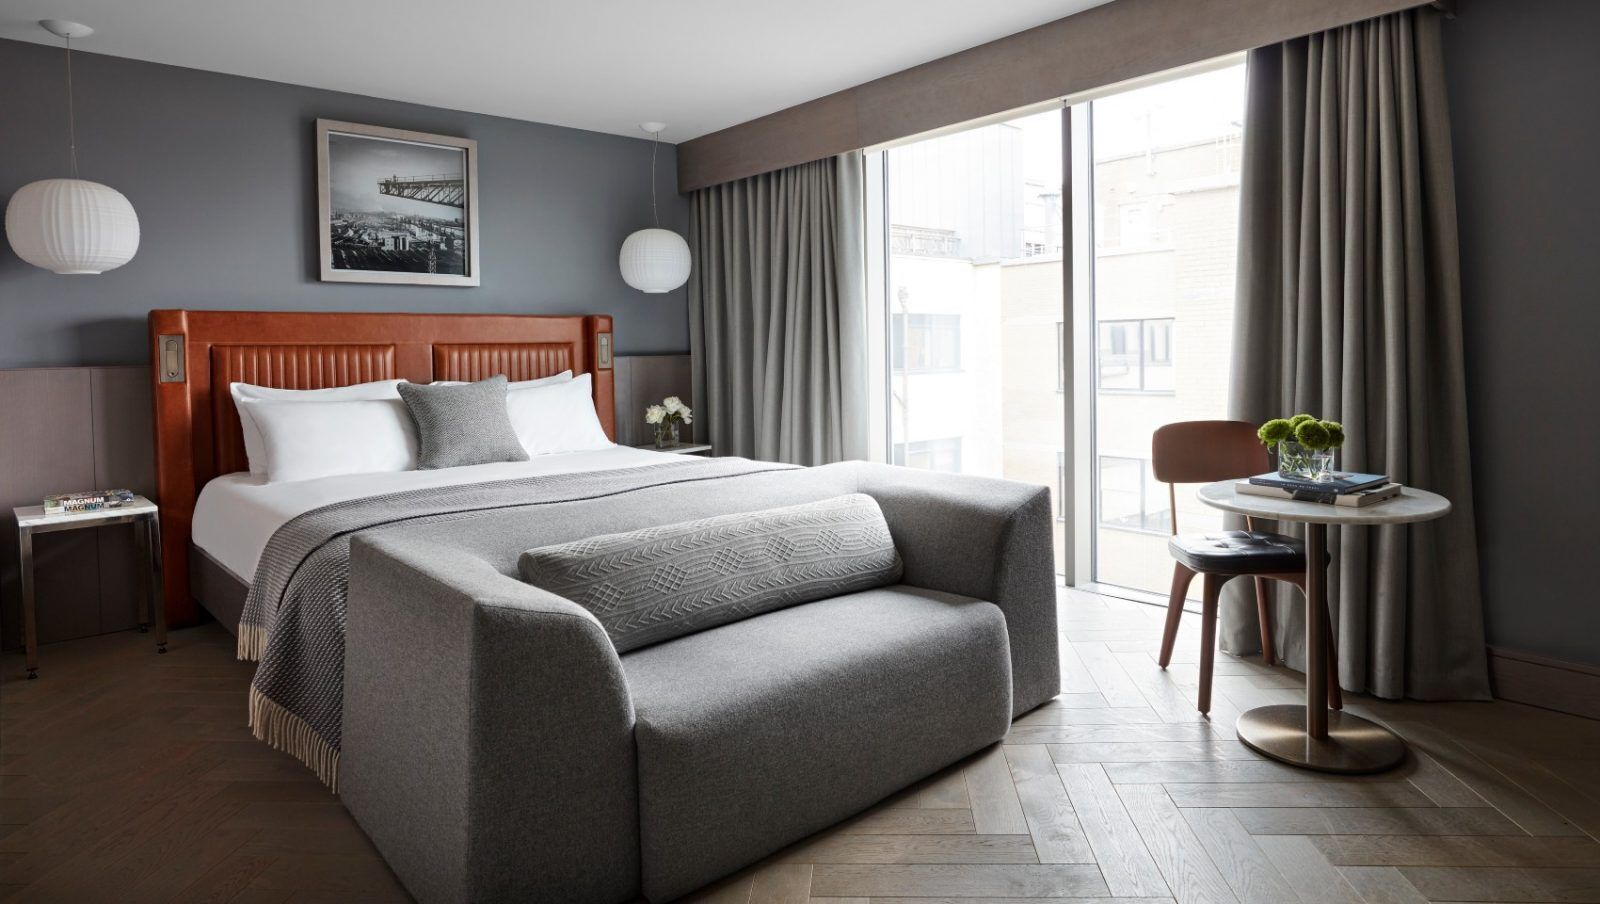 Top 10 great hotels in Glasgow: from serviced apartments to stylish boutique properties and grand townhouses